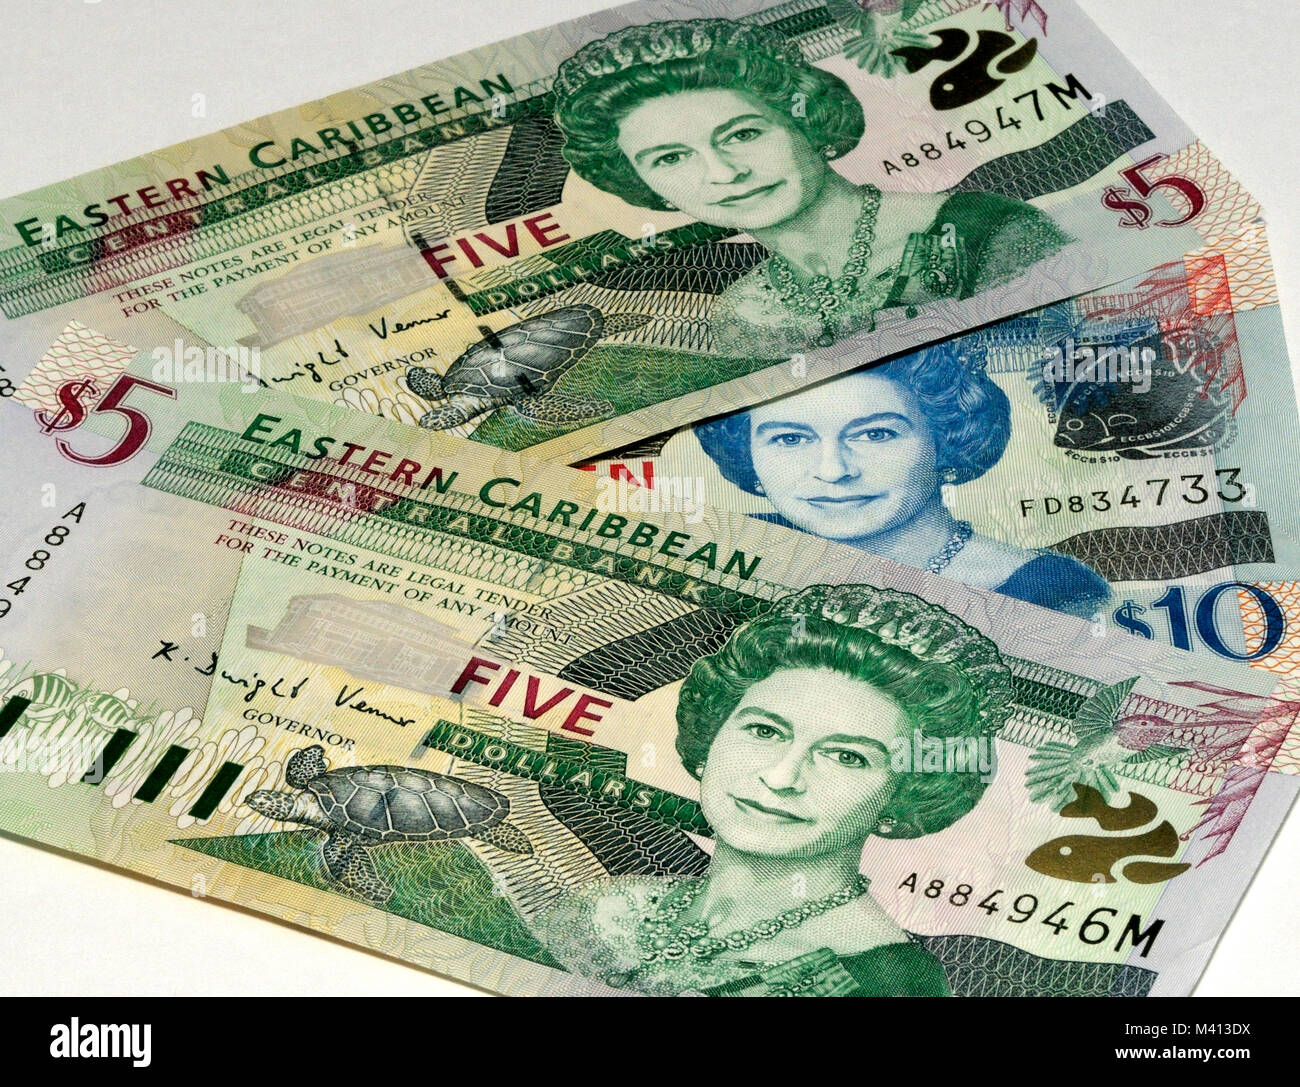 Eastern Caribbean Currency Bank Notes Stock Photo